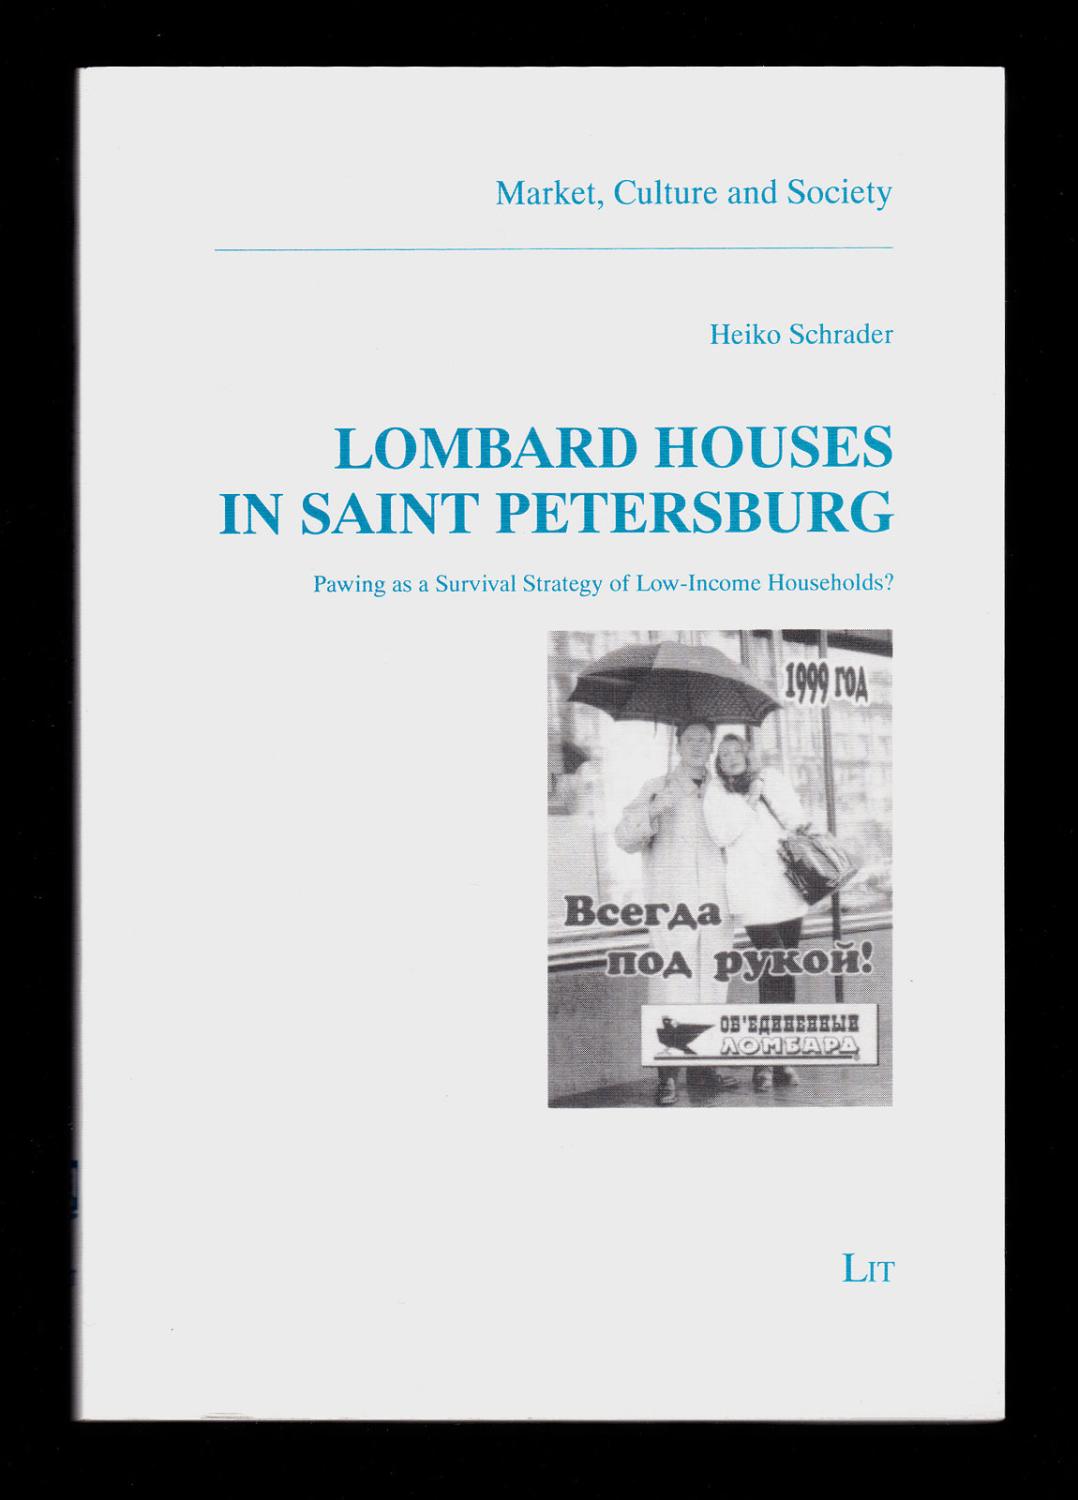 Lombard Houses in Saint Petersburg: Pawning as a Survival Strategy of Low-Income Households? (Market, Culture and Society) - Heiko Schrader